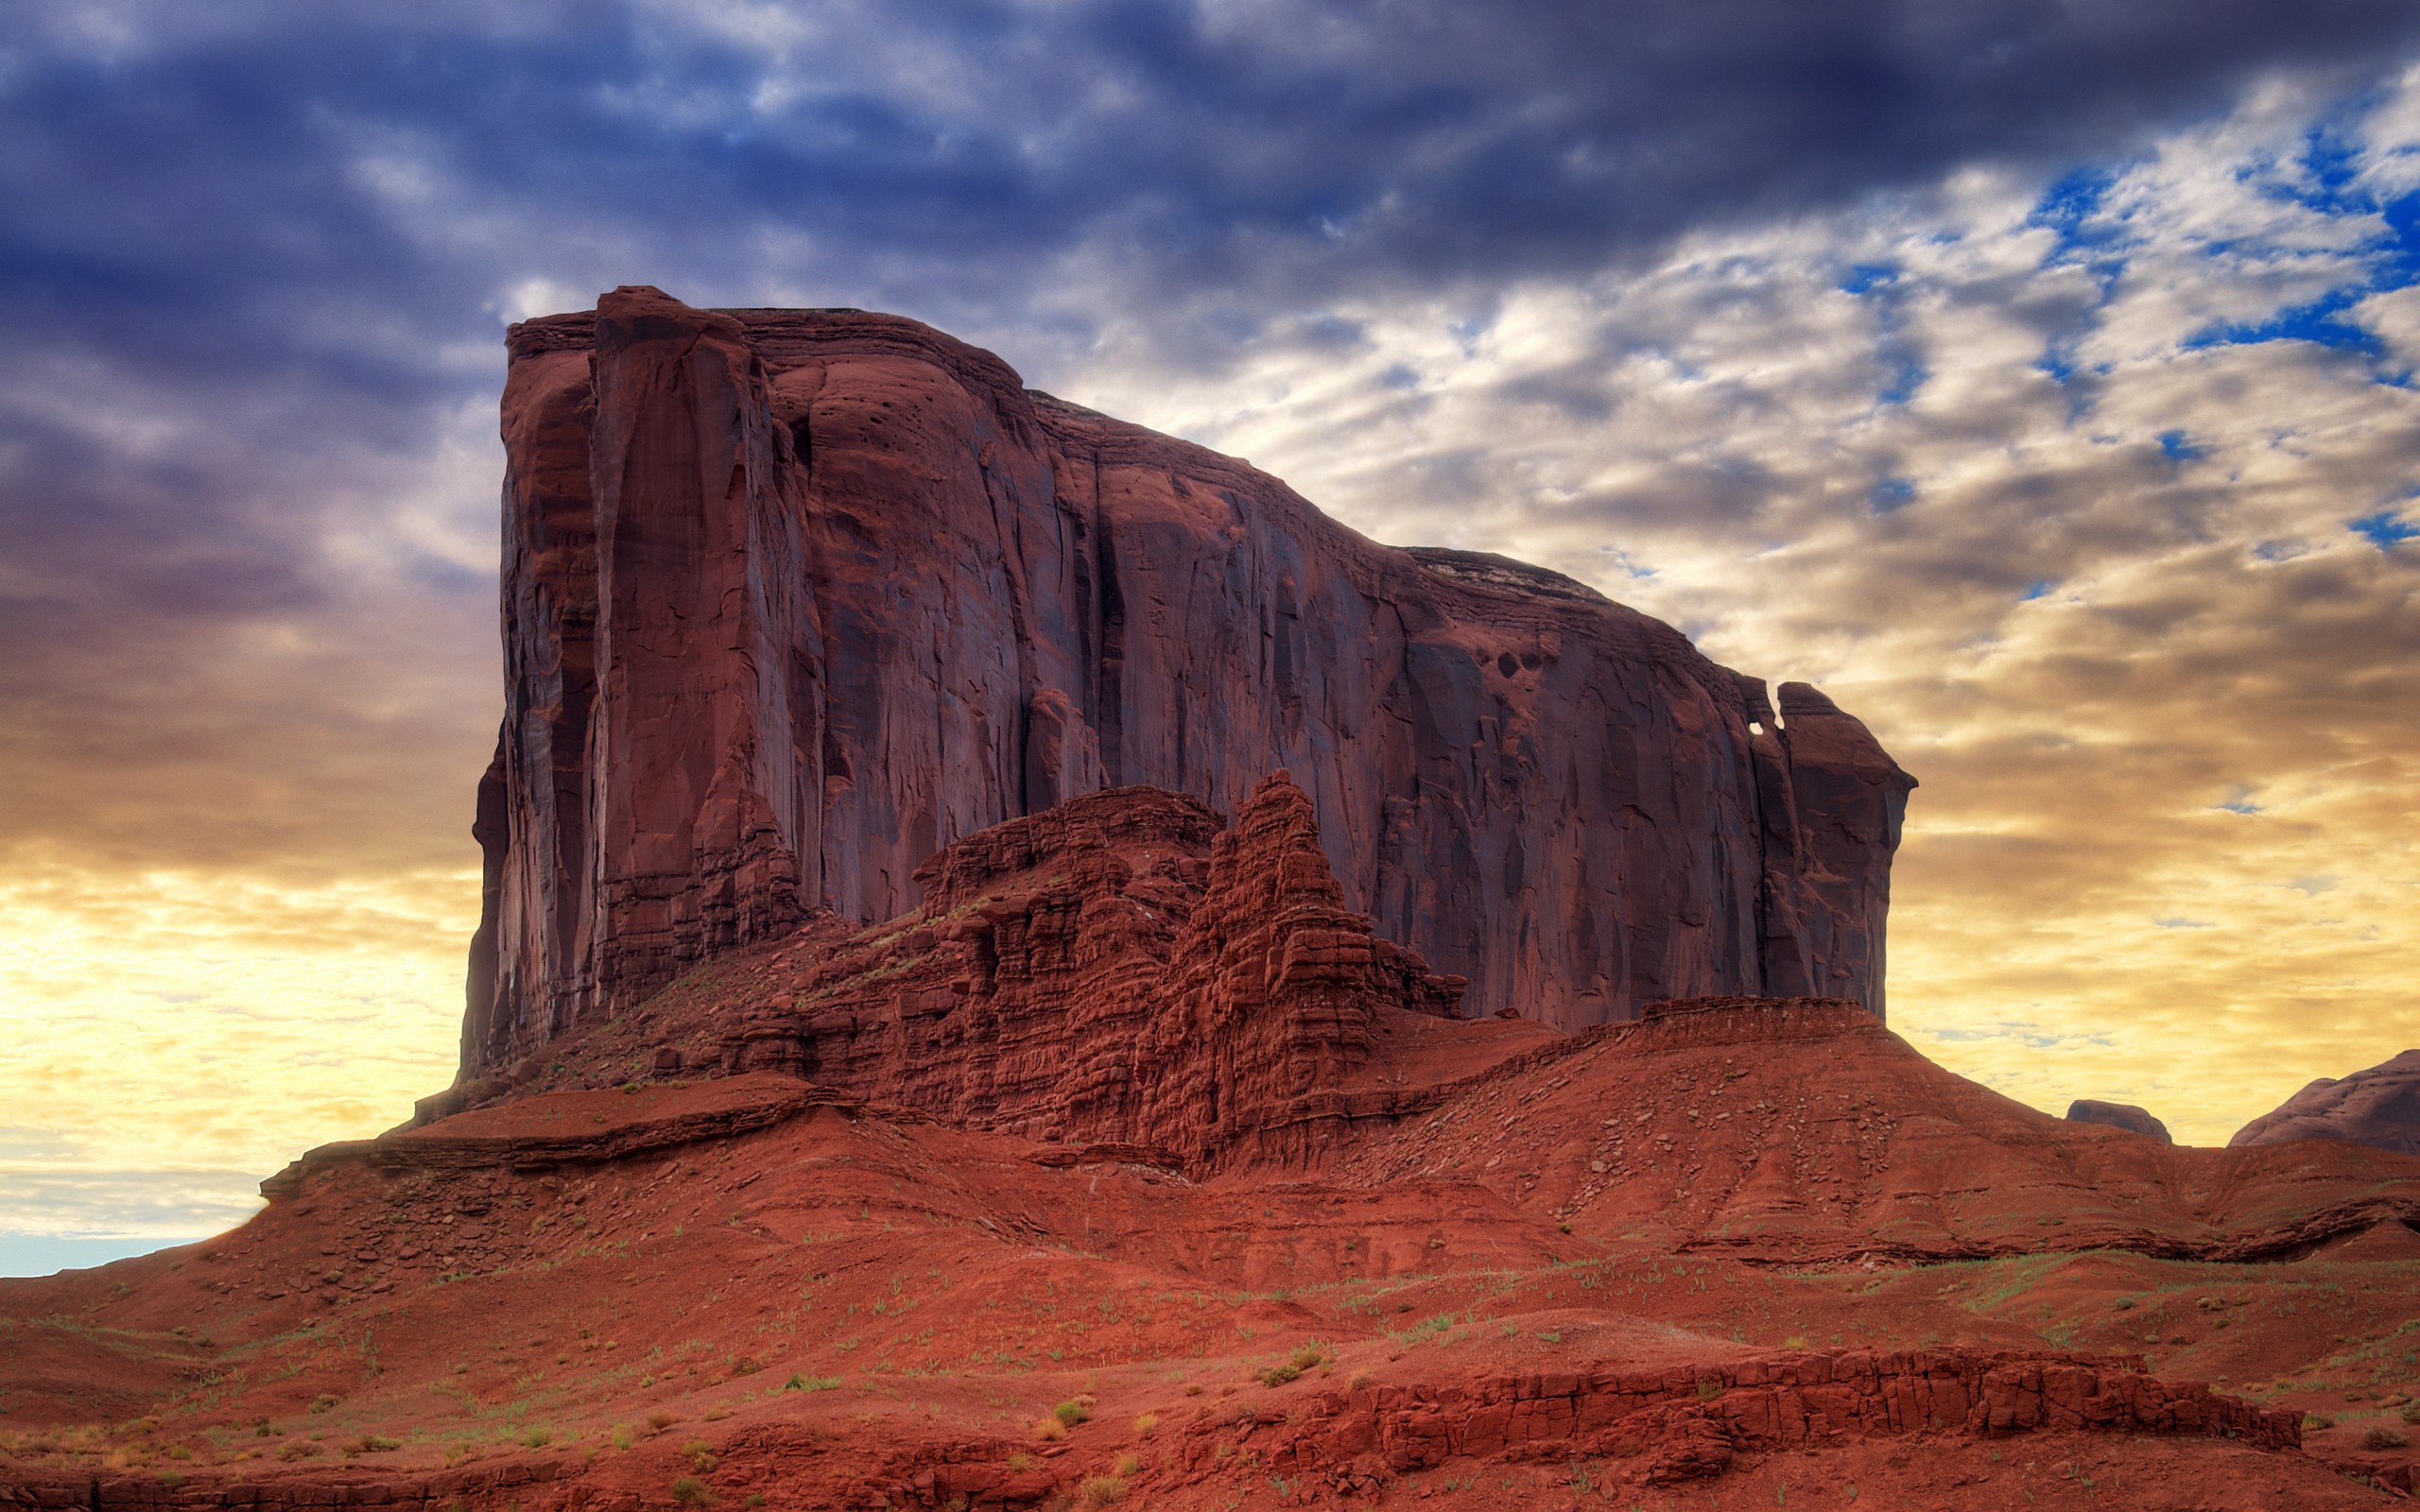 General 2560x1600 landscape nature mountains rock formation Utah rocks red desert clouds sky yellow brown